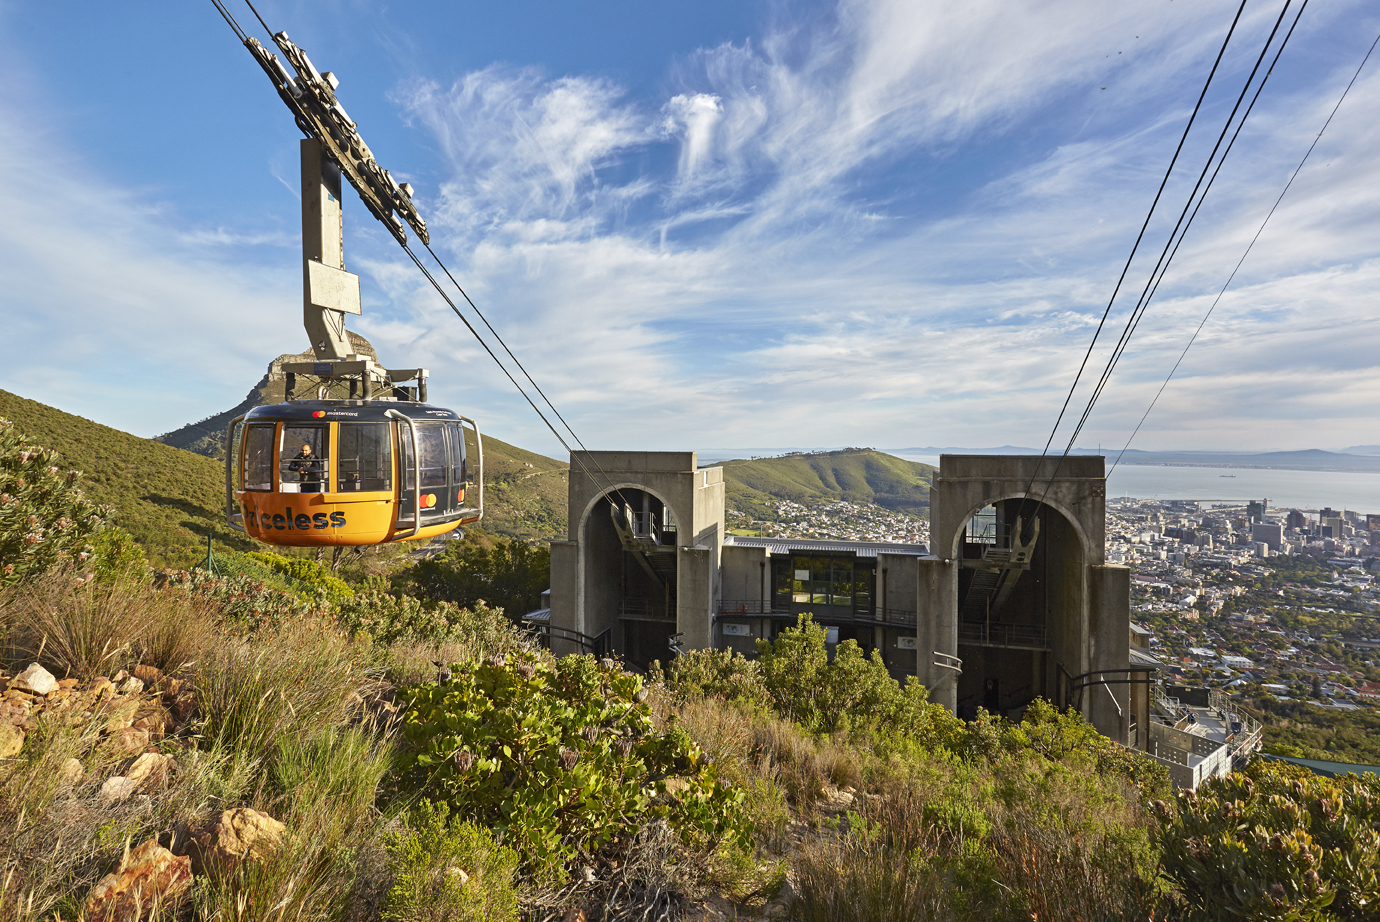 The history of an iconic landmark, the Table Mountain cableway